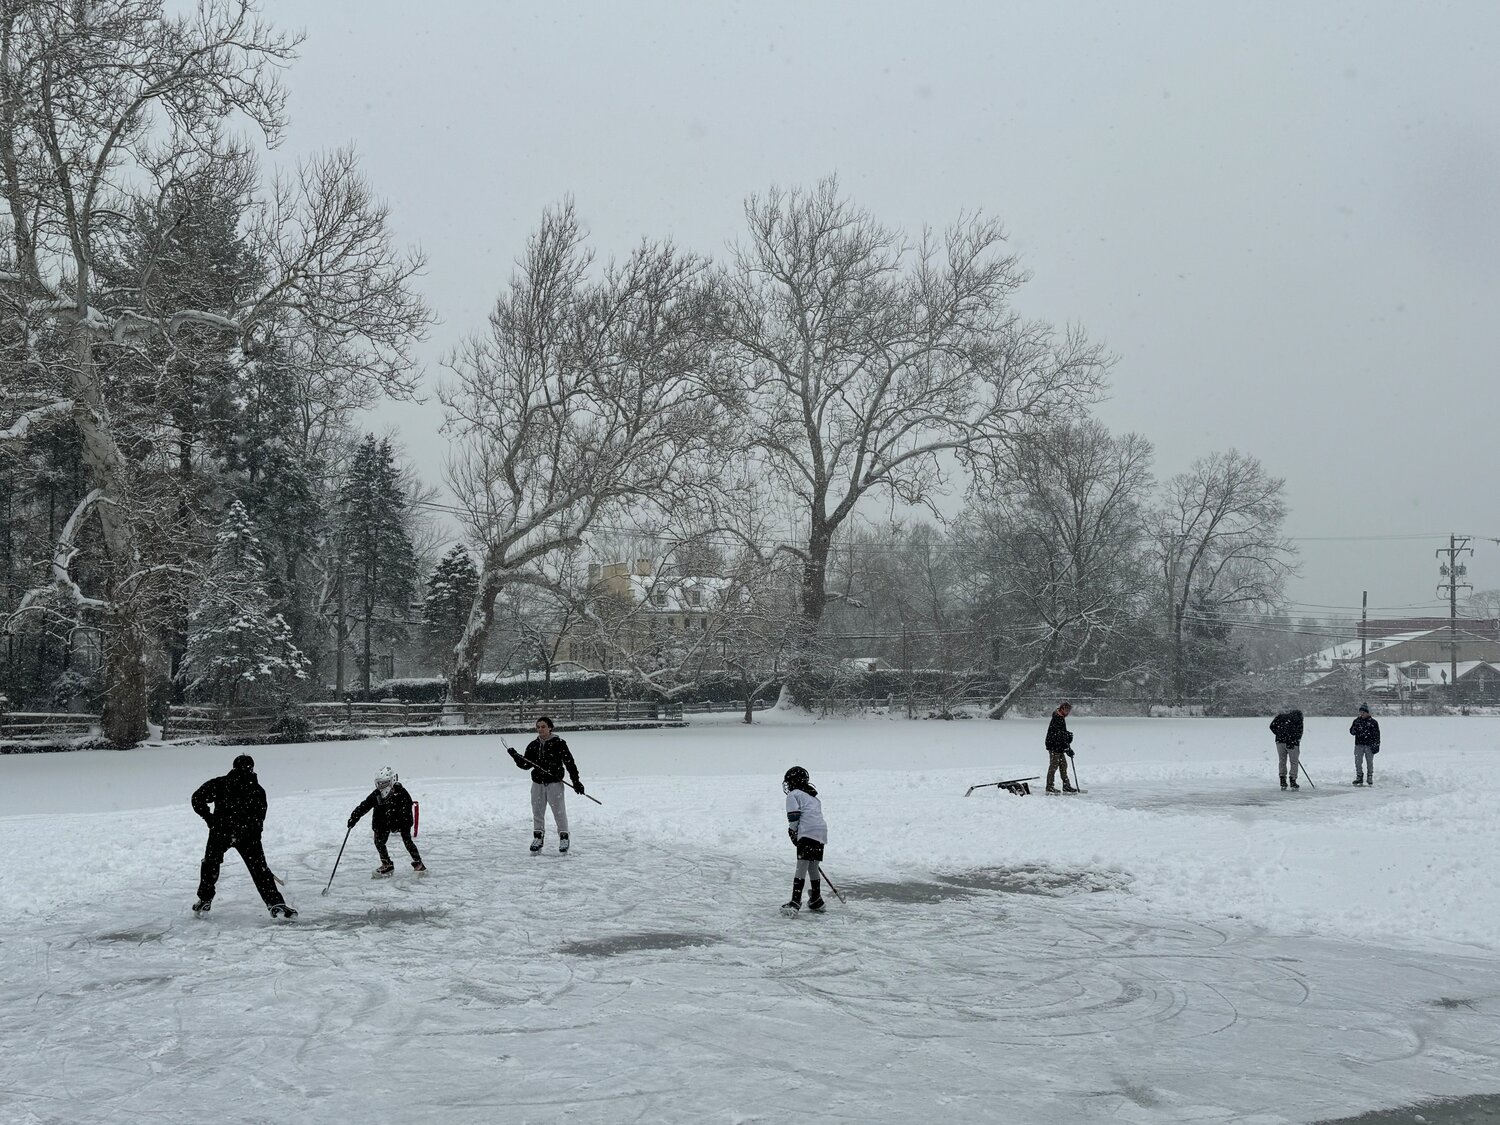 Frozen-over Lake Afton, in Yardley, became a makeshift ice hockey rink Friday as local children laced up their skates and enjoyed an unexpected day off from school.